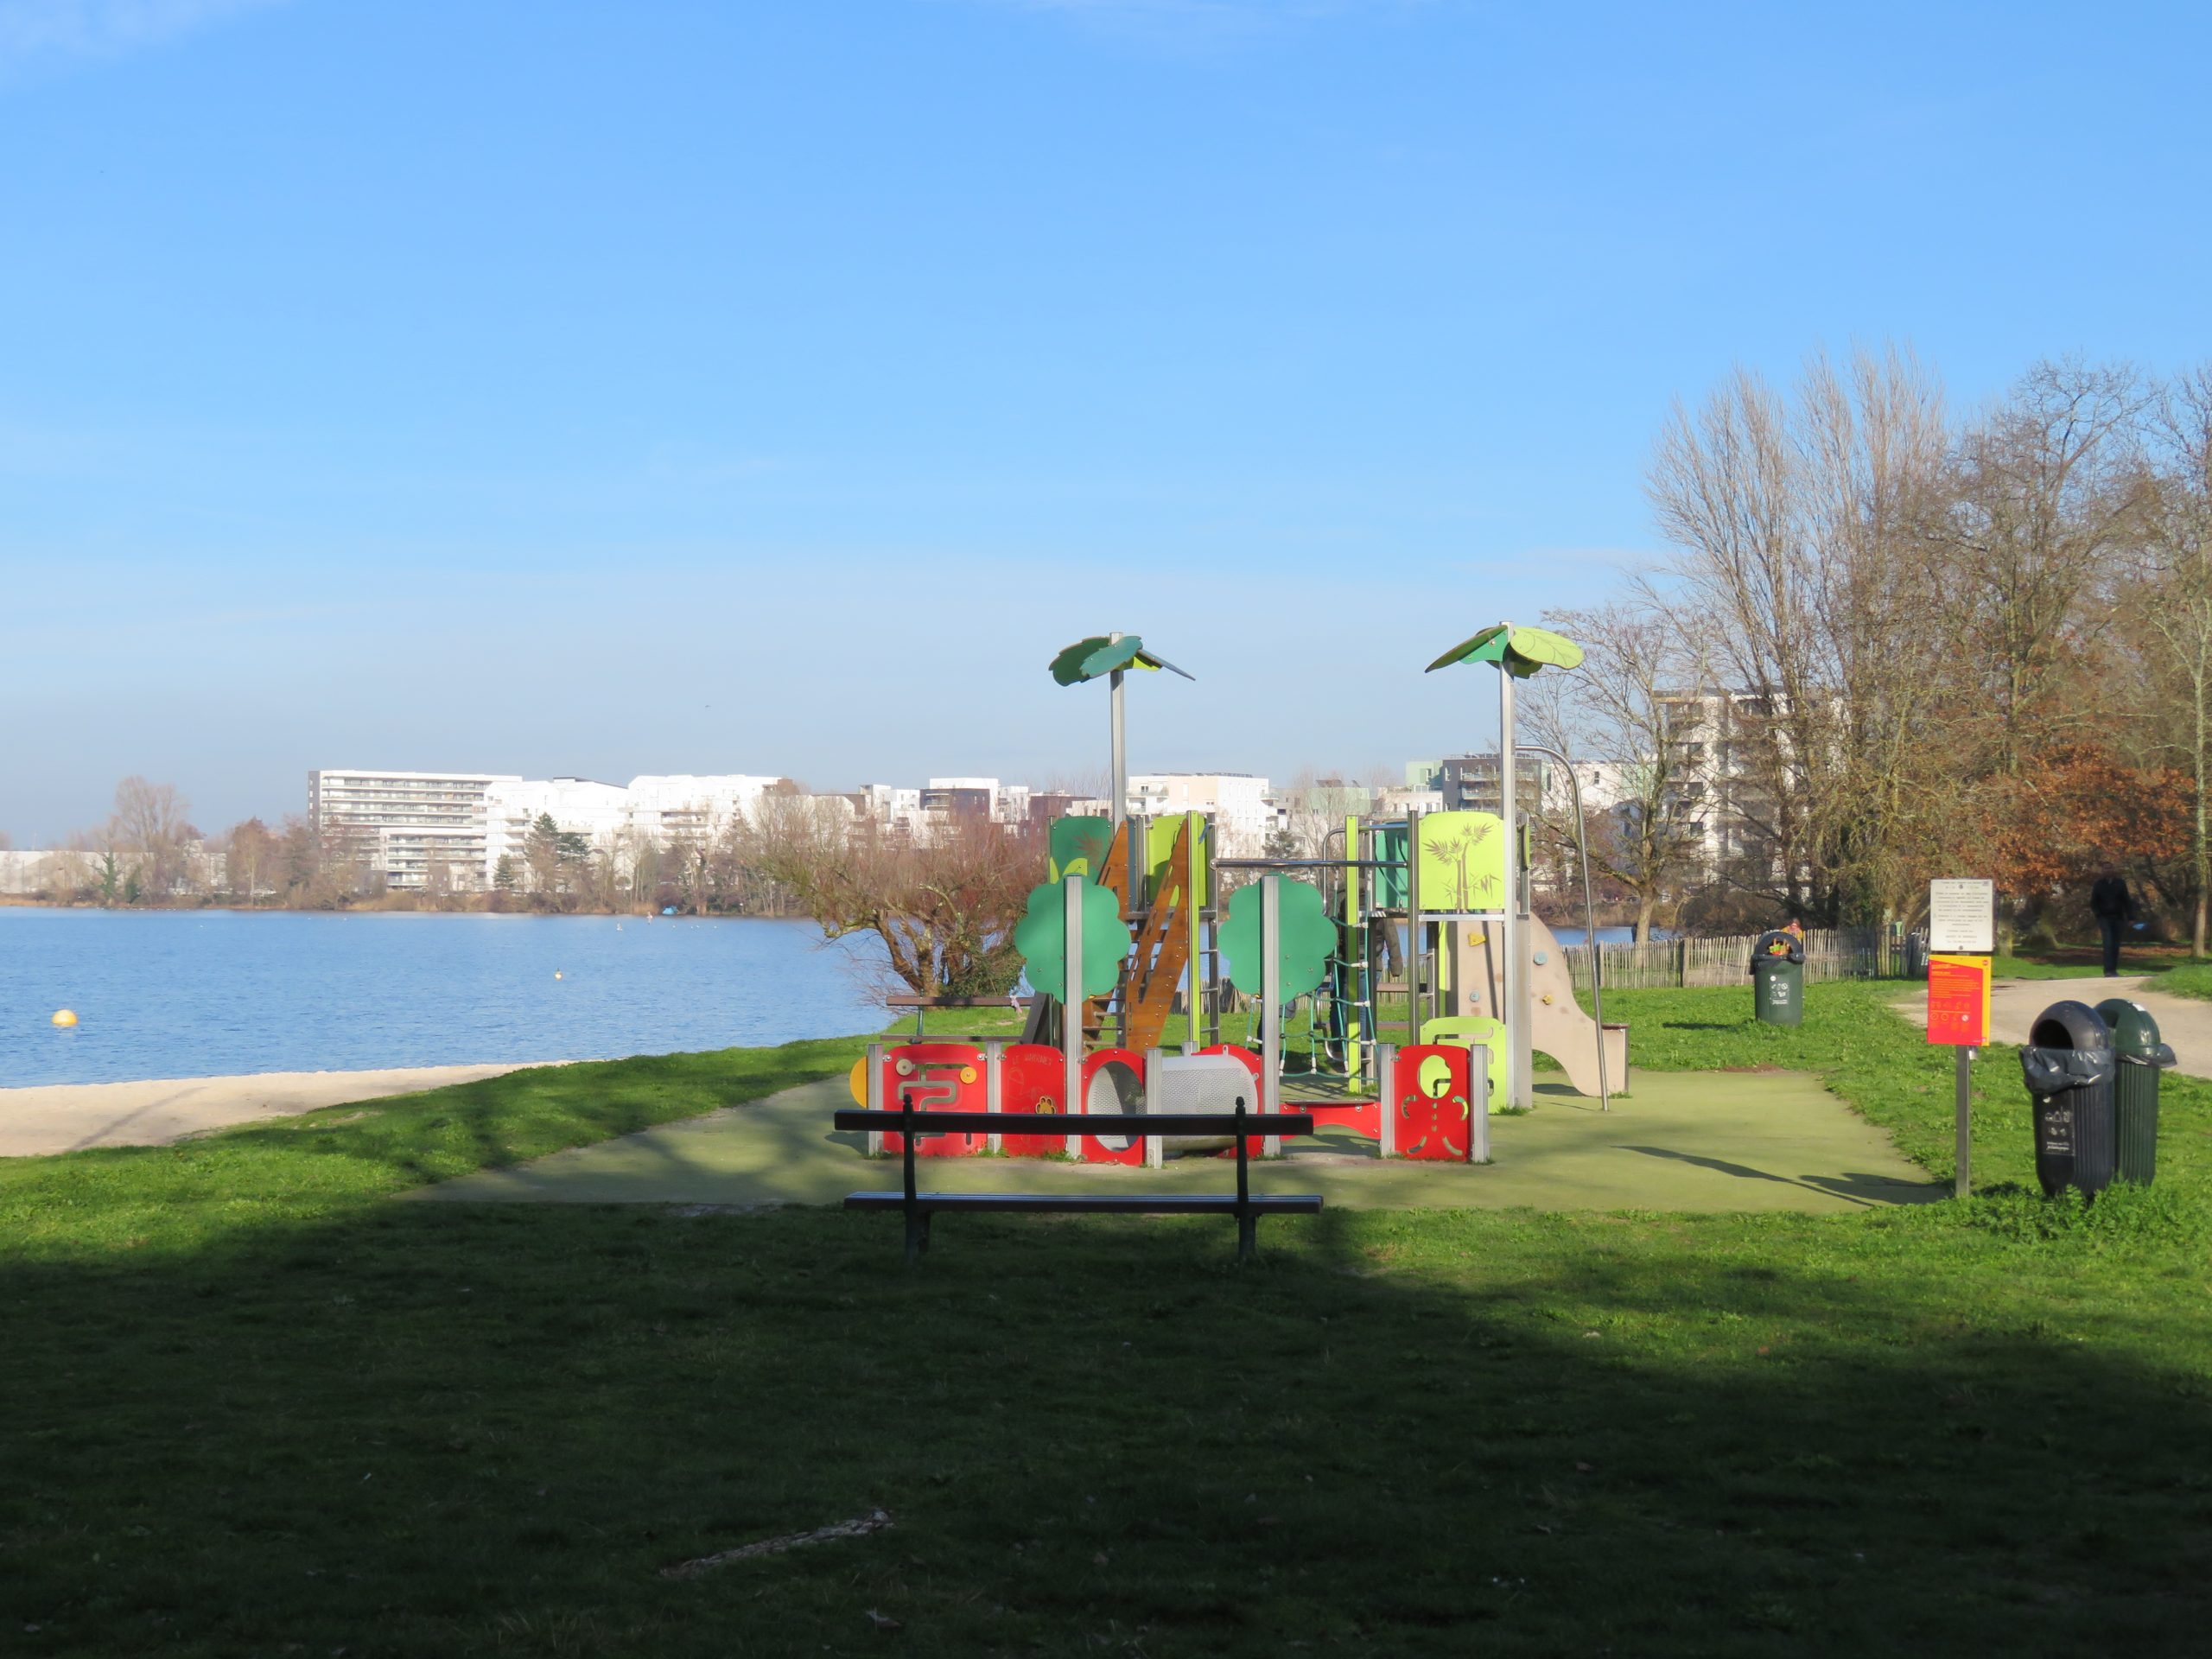 Roller ride: Around the lake of Bordeaux – IMPRATICABLE